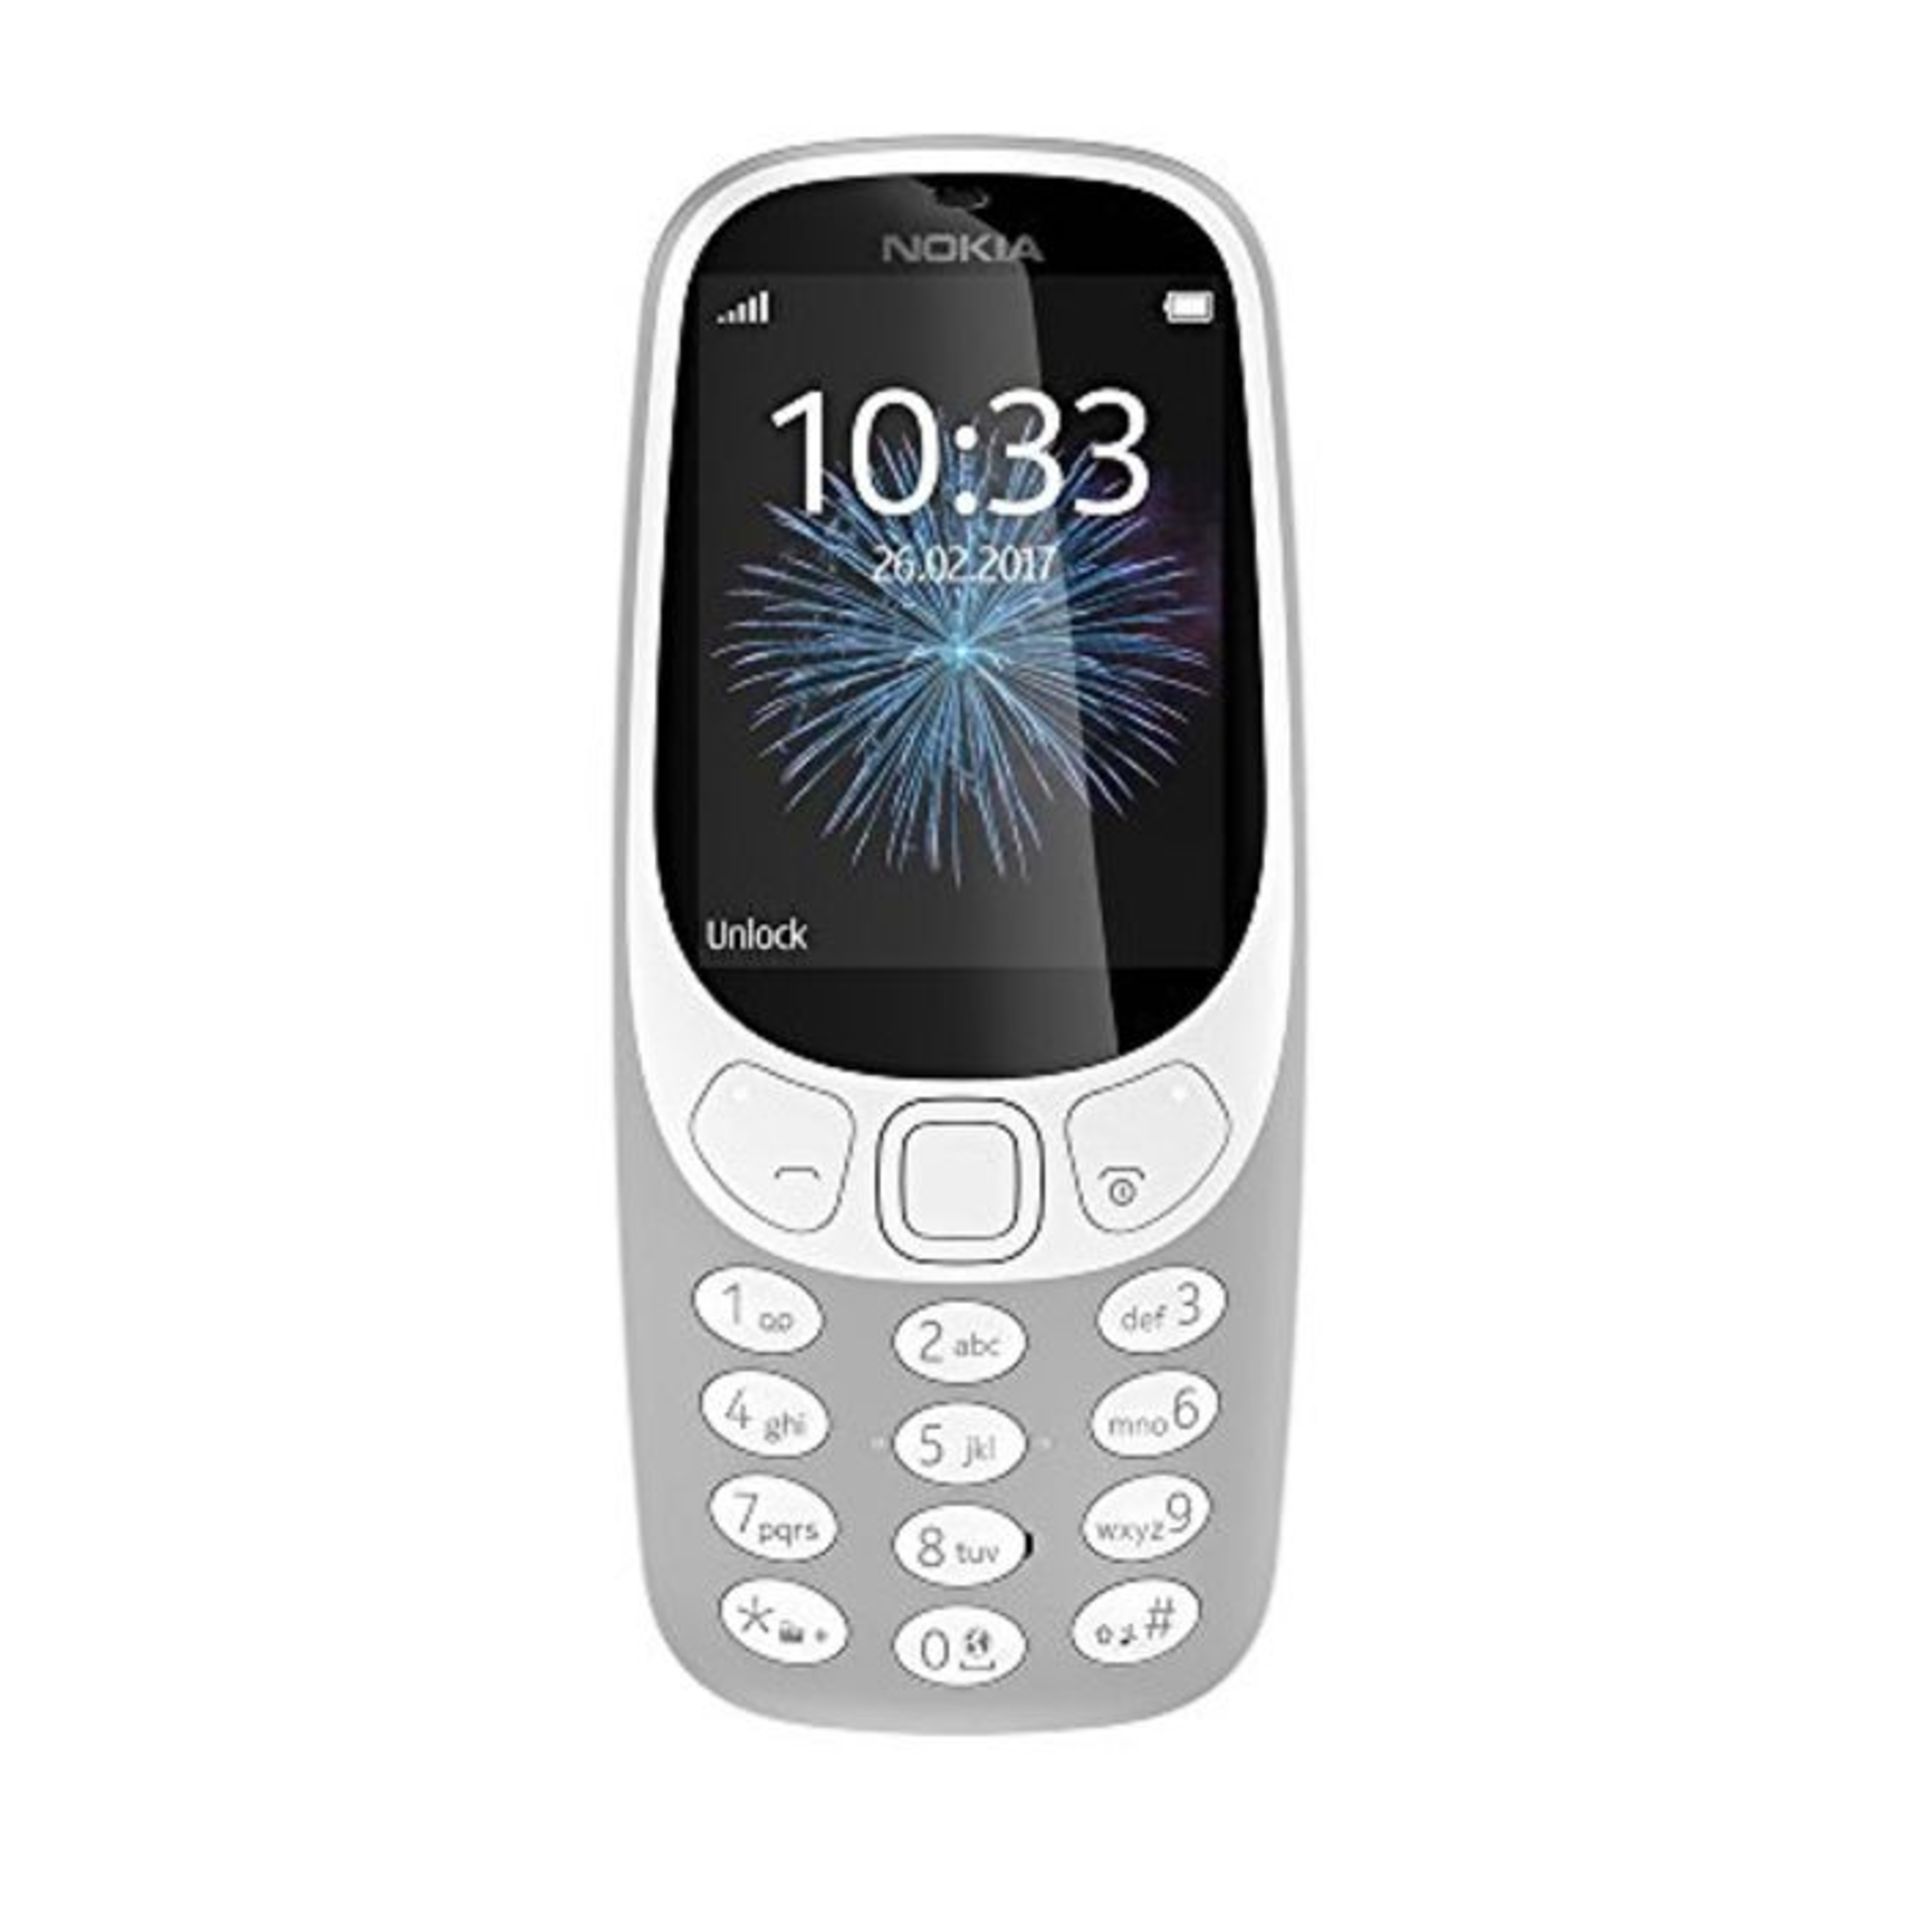 RRP £55.00 Nokia 3310 2G mobile phone (2.4 inch color display, 2MP camera, Bluetooth, radio, MP3